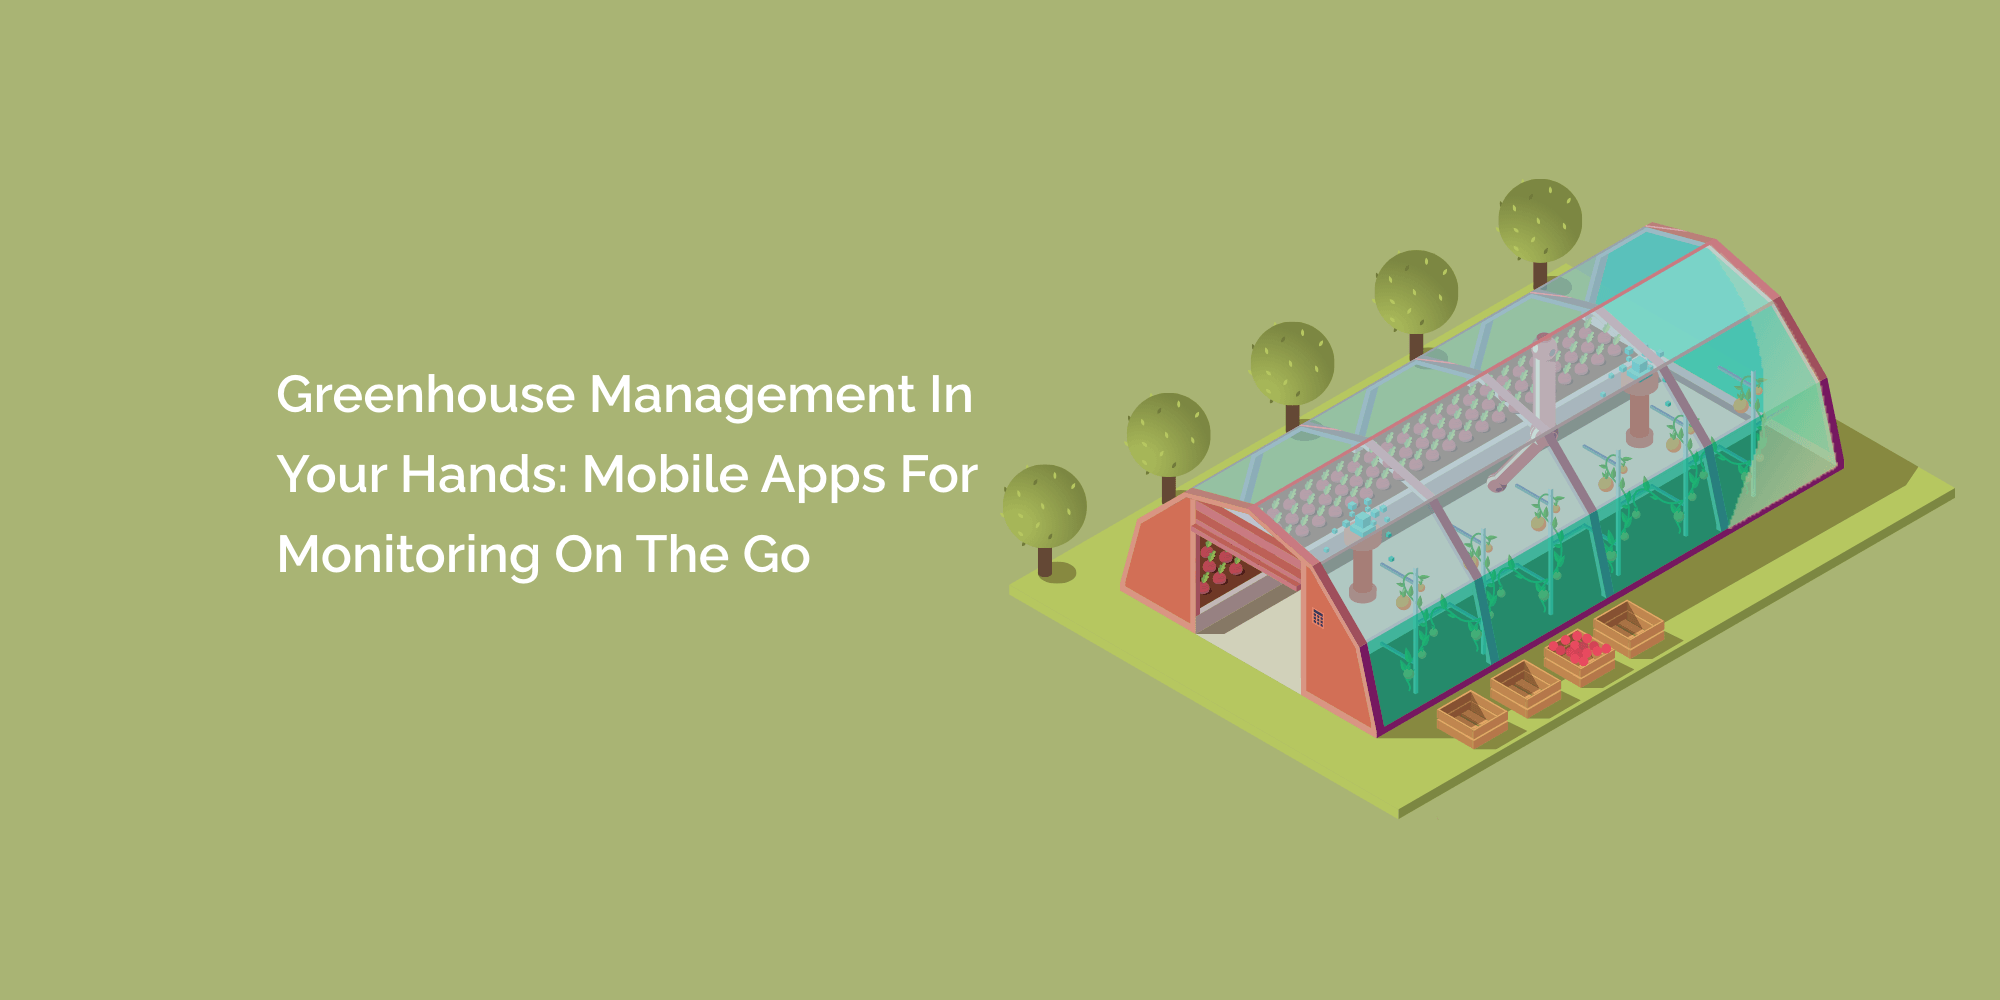 Greenhouse Management in Your Hands: Mobile Apps for Monitoring on the Go